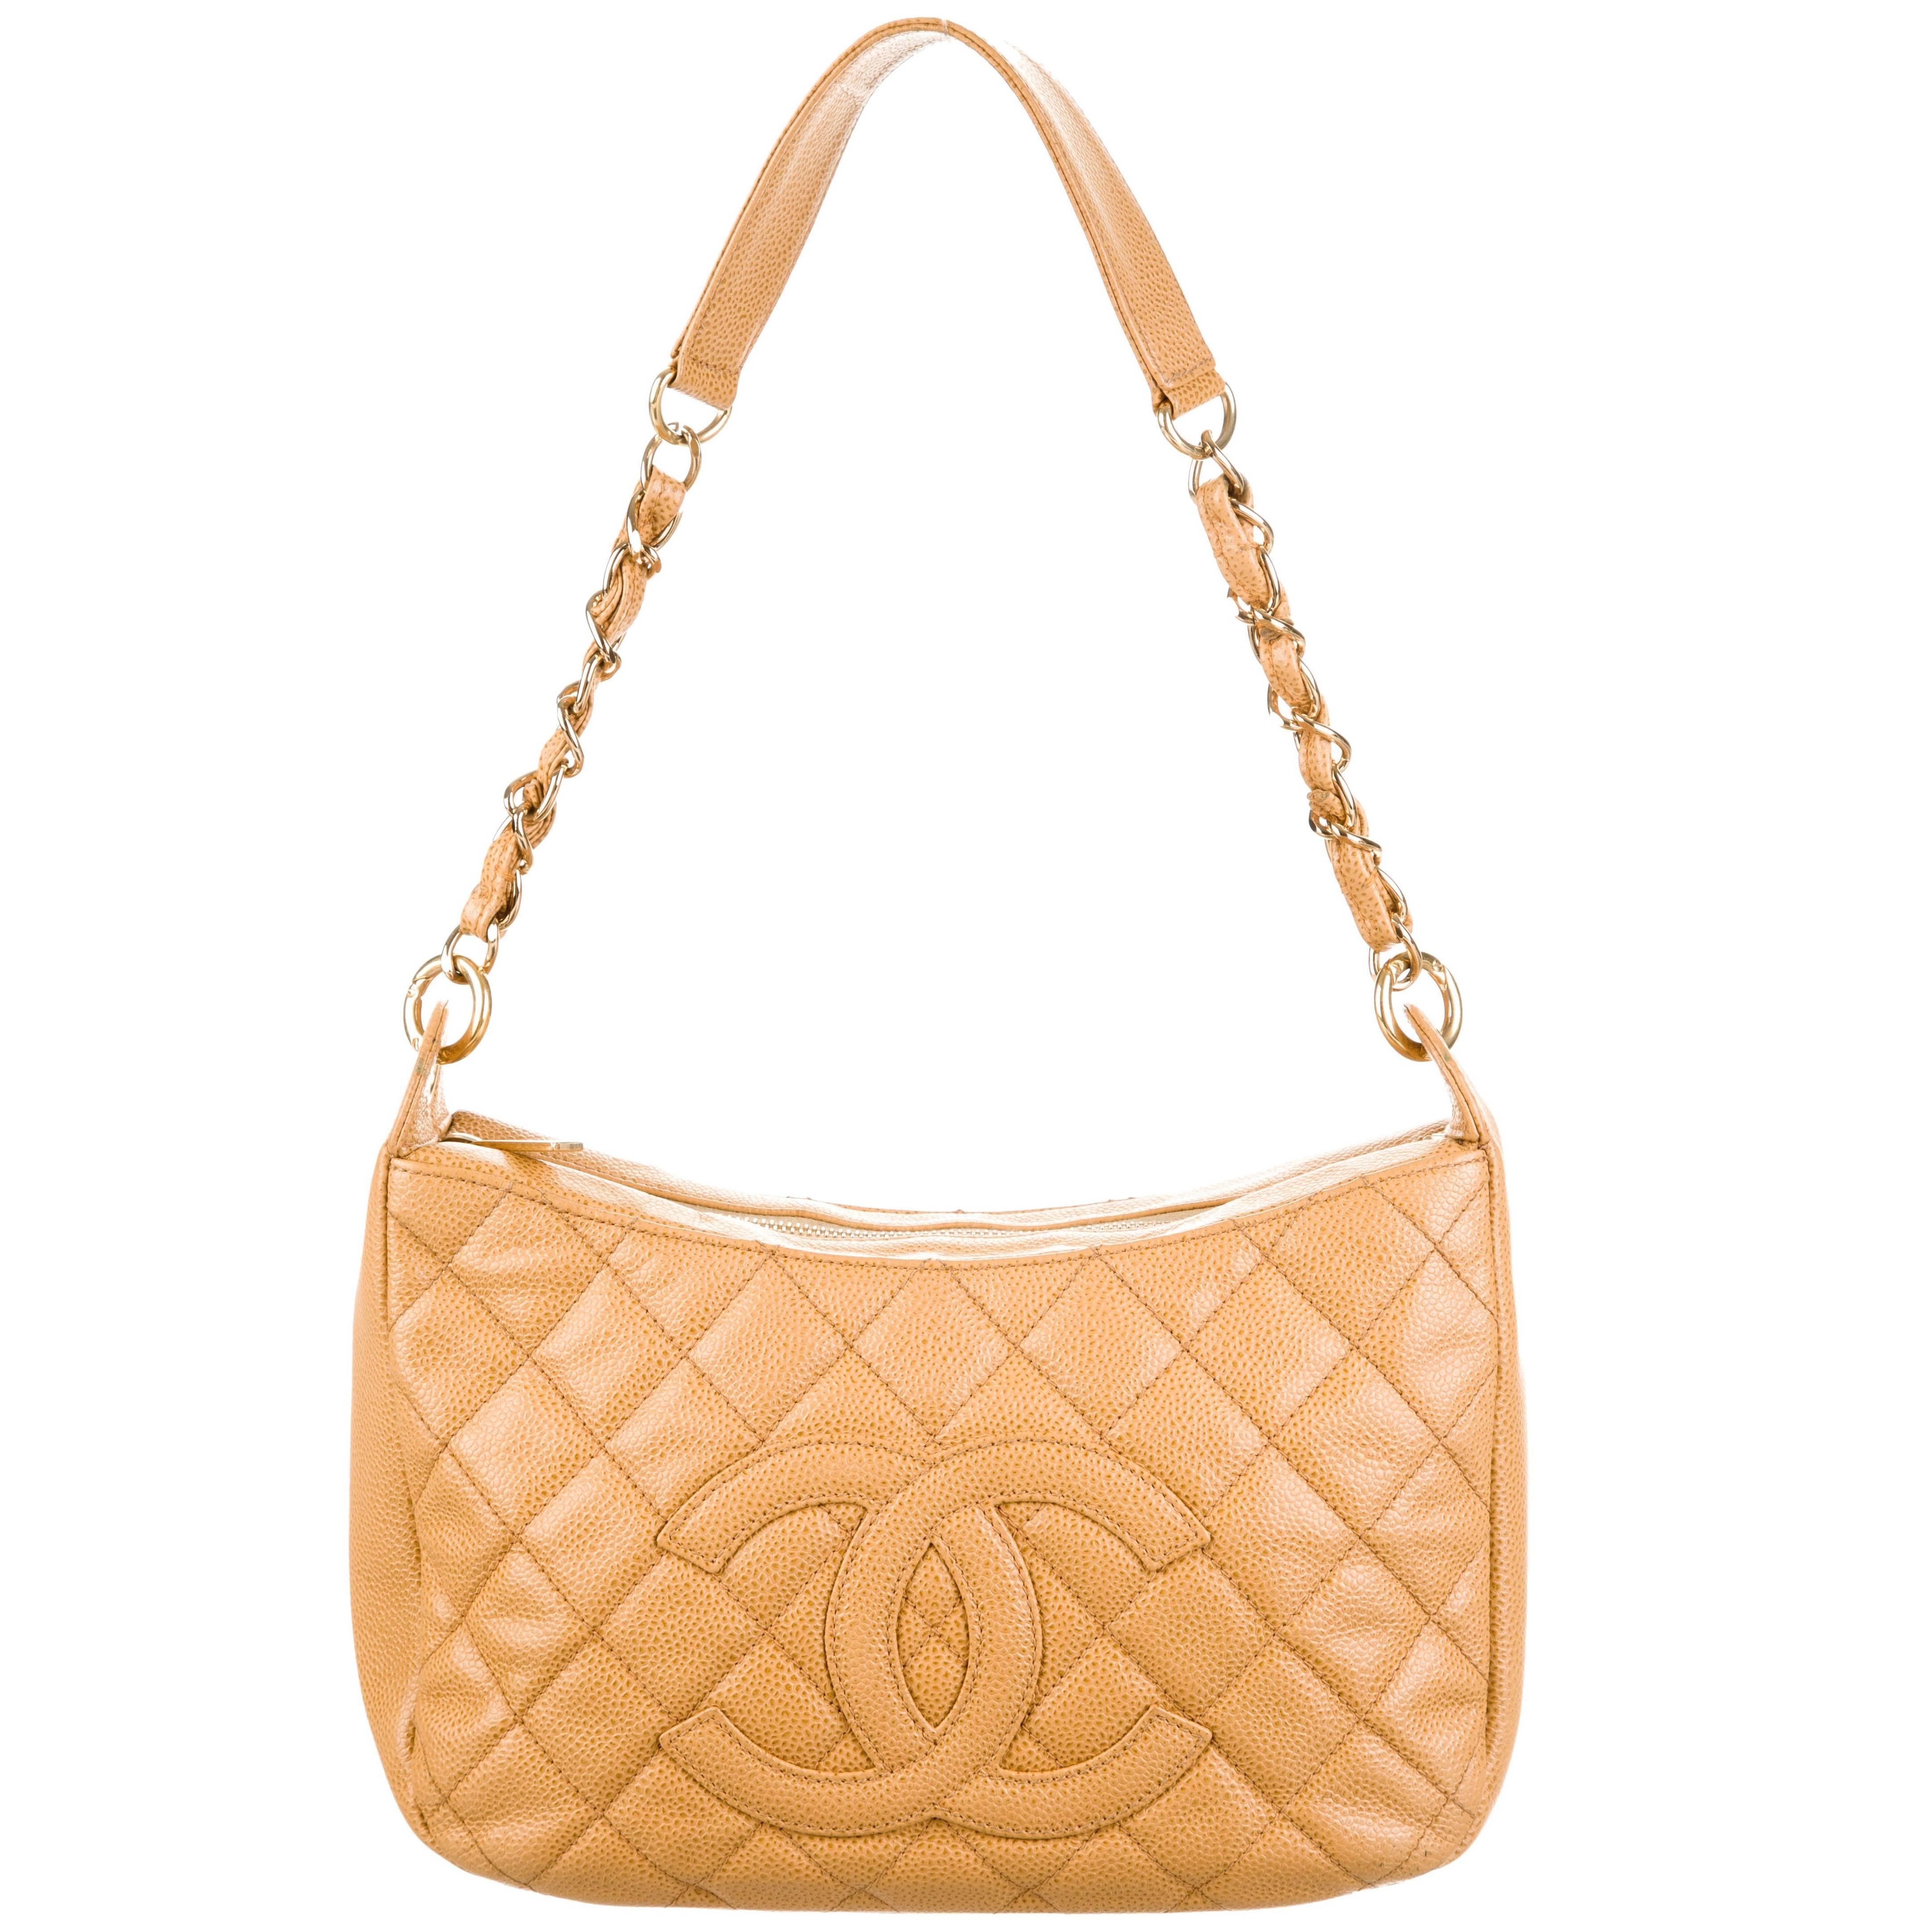 Chanel Nude Caviar Leather Gold Evening Top Handle Satchel Chain Shoulder Bag